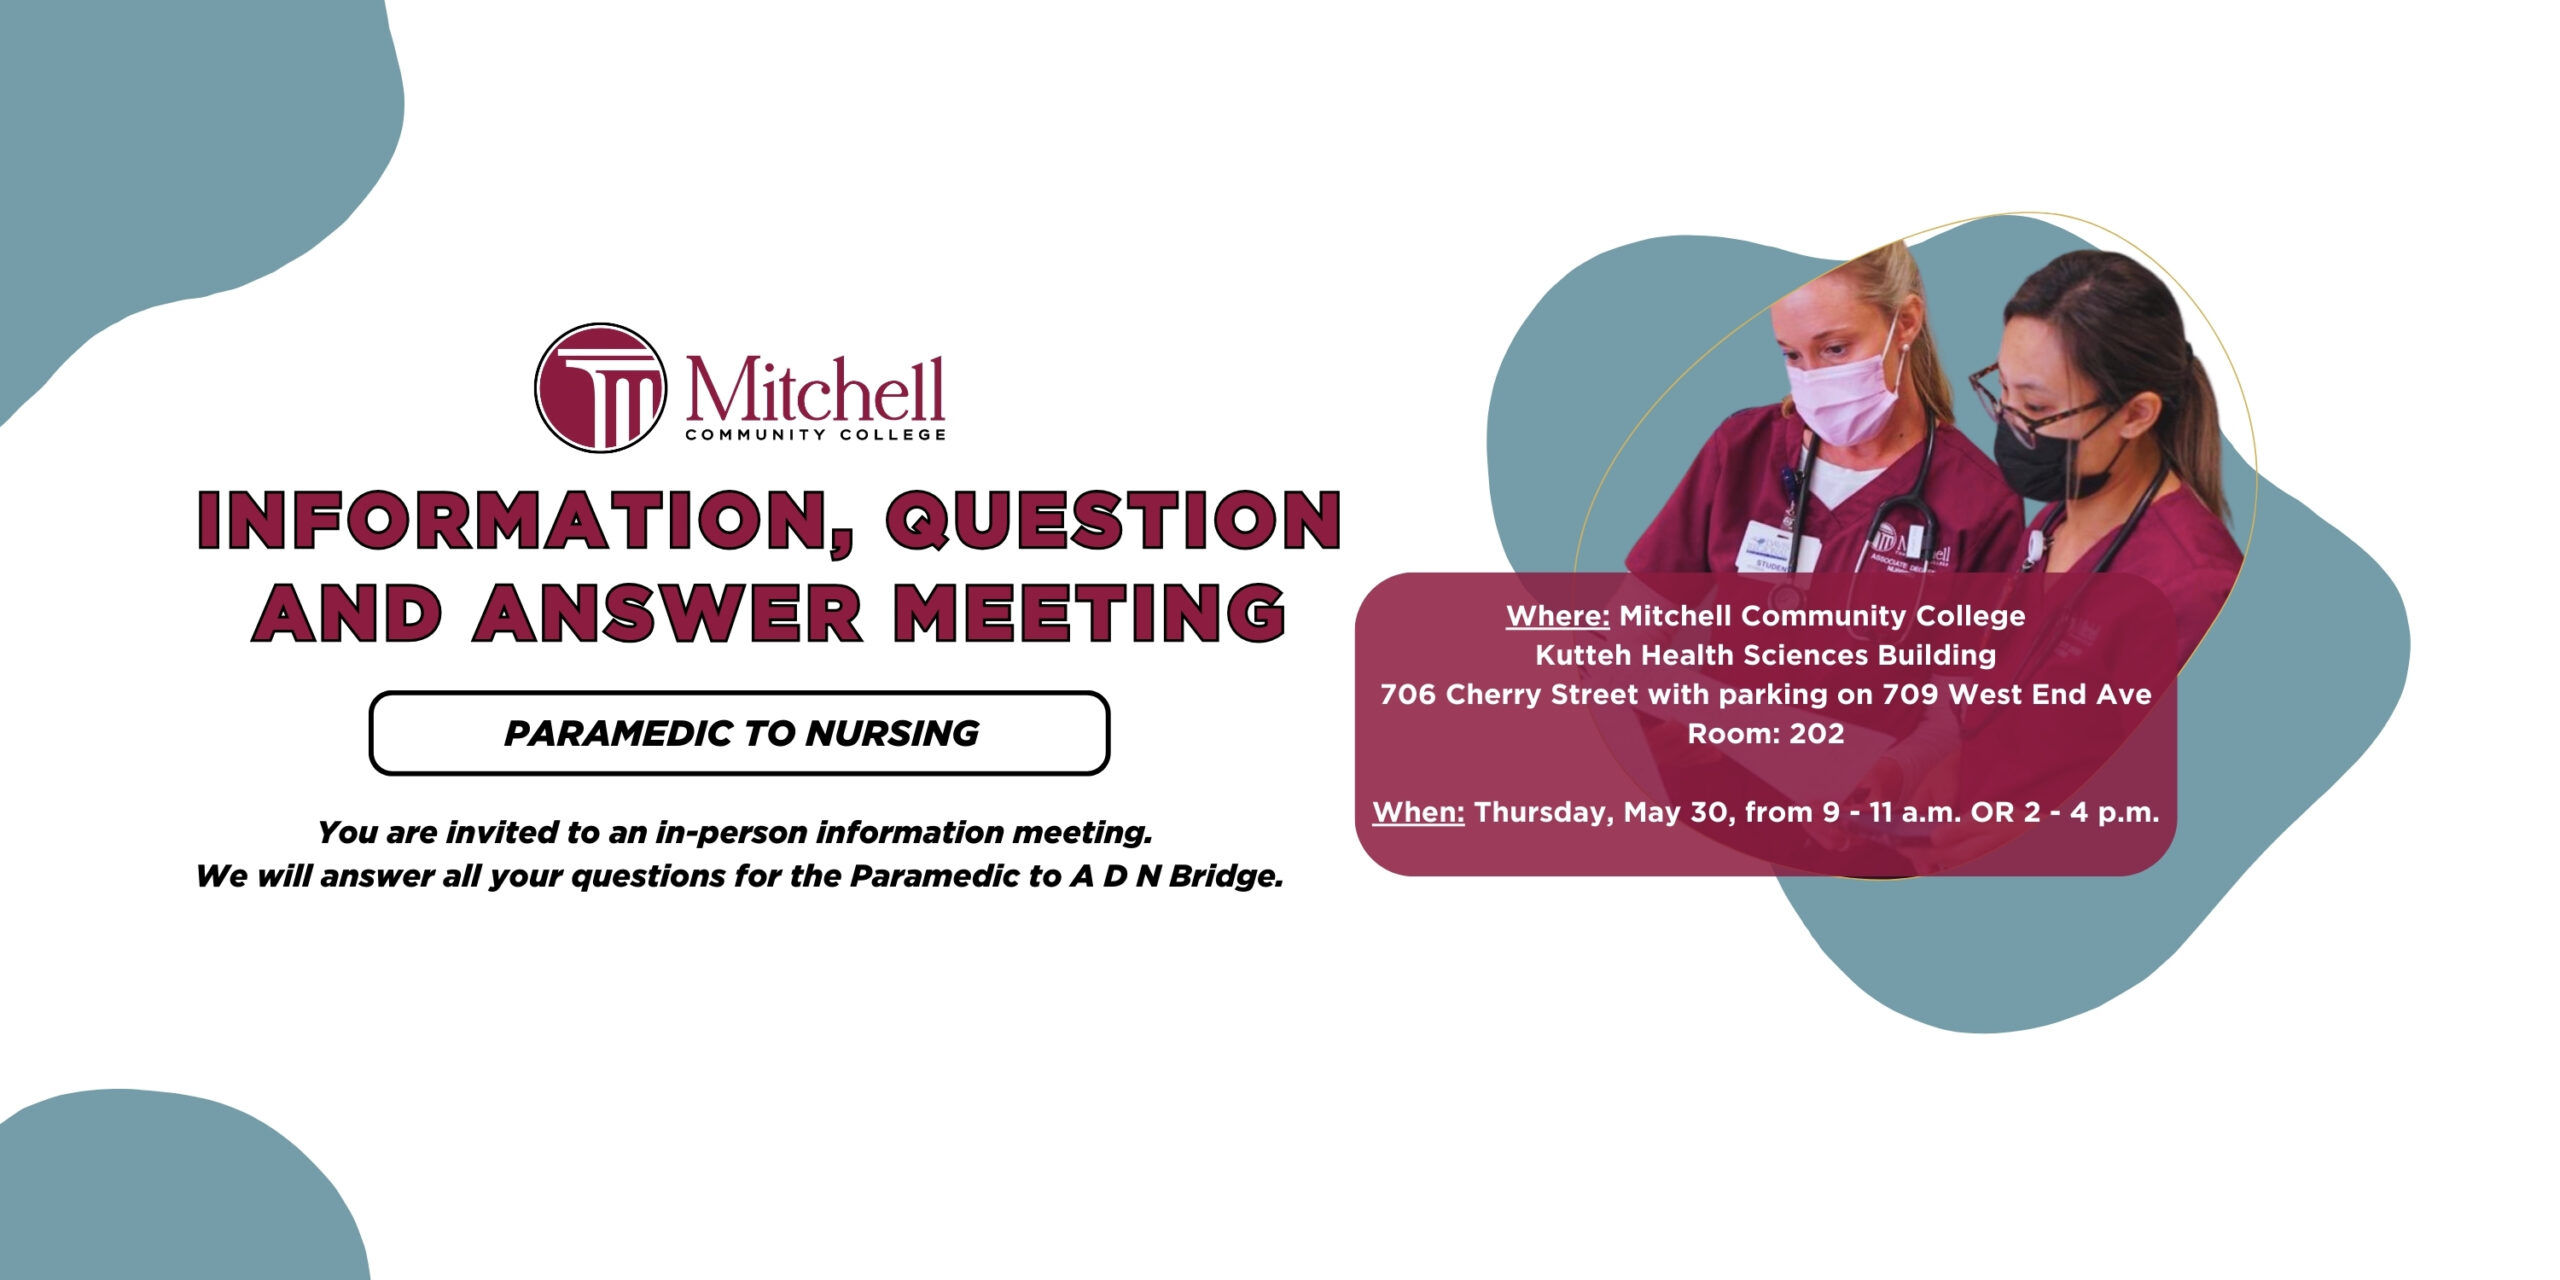 Banner that reads "Information, question and answer meeting | Paramedic to Nursing | You are invited to an in-person information meeting. We will answer all your questions for the Paramedic to ADN Bridge. | Where: Mitchell Community College - Kutteh Health Sciences Building - 706 Cherry Street with parking on 709 West End Ave - Room: 202 - When: Thursday, May 30, from 9 - 11 a.m. OR 2 - 4 p.m.".